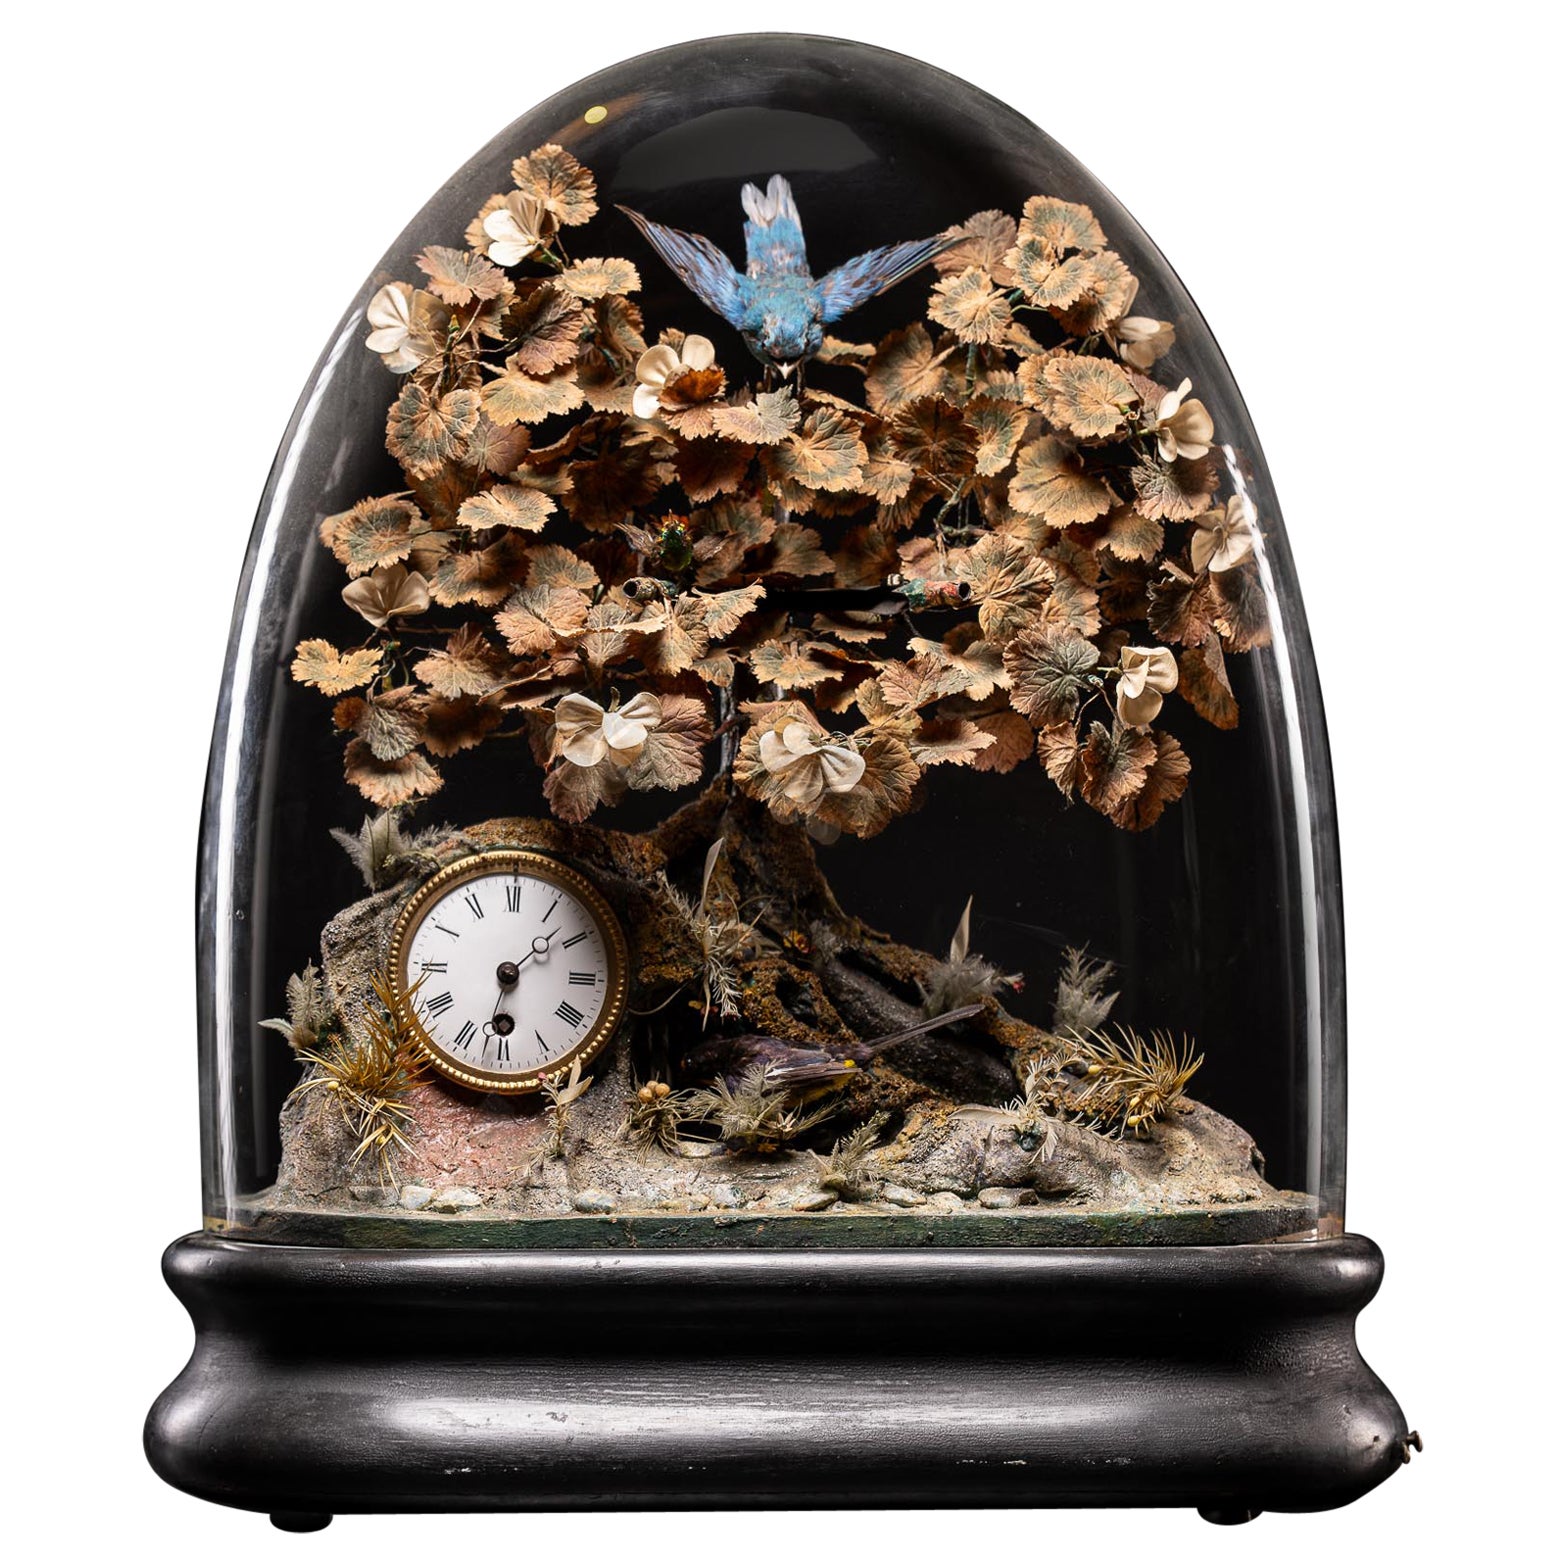 Blaise Bontems Musical Automaton Singing birds and Clock under glass dome For Sale